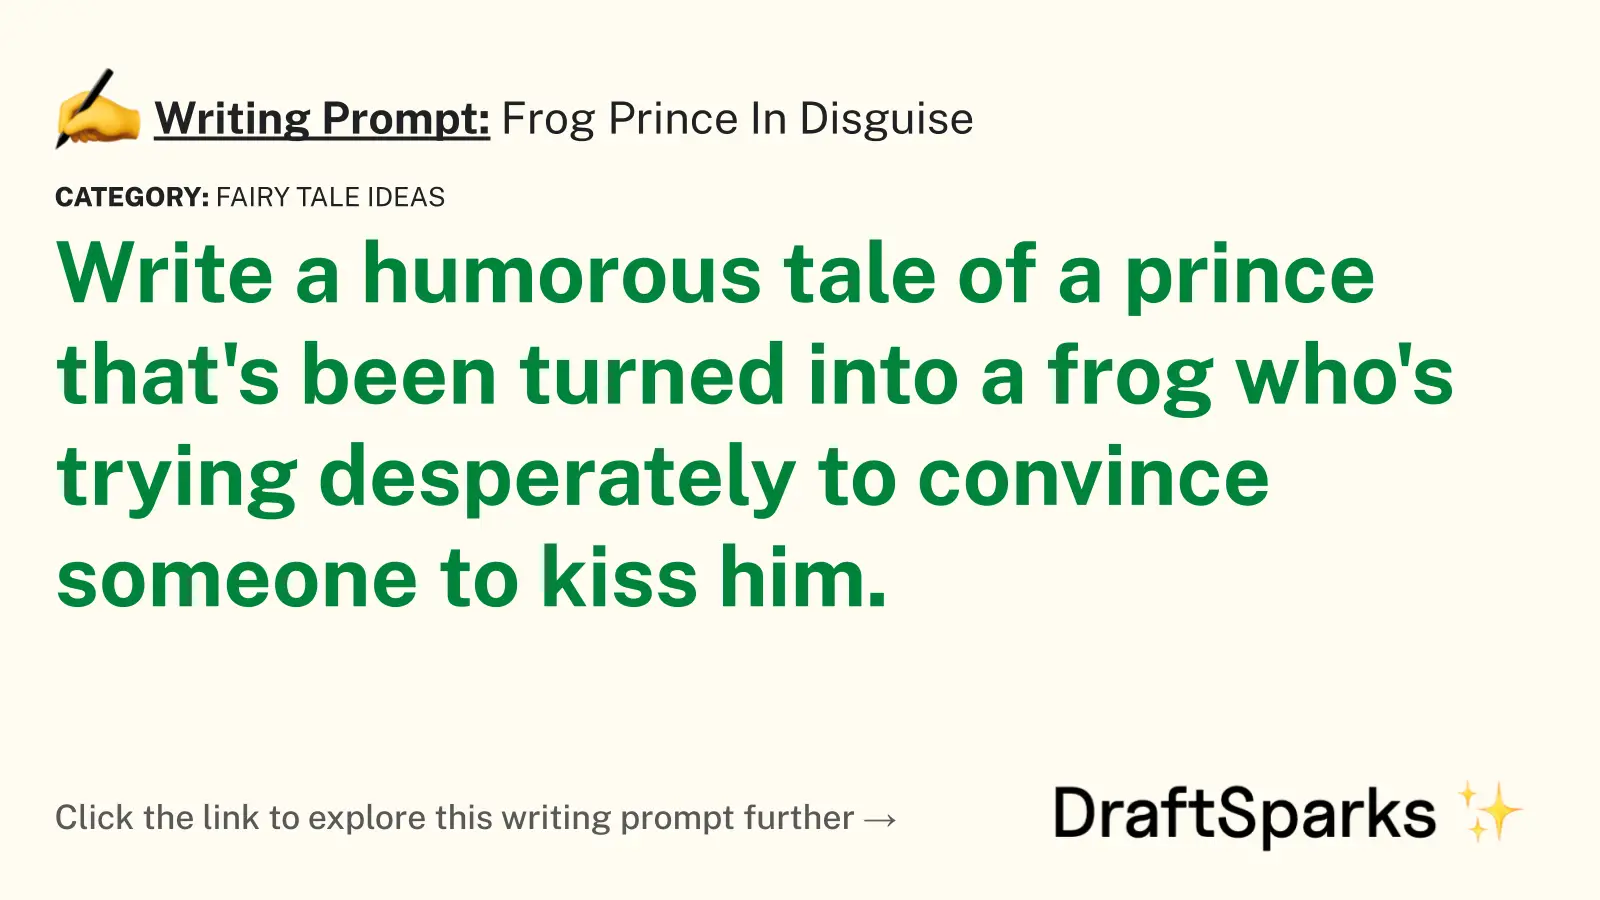 Frog Prince In Disguise